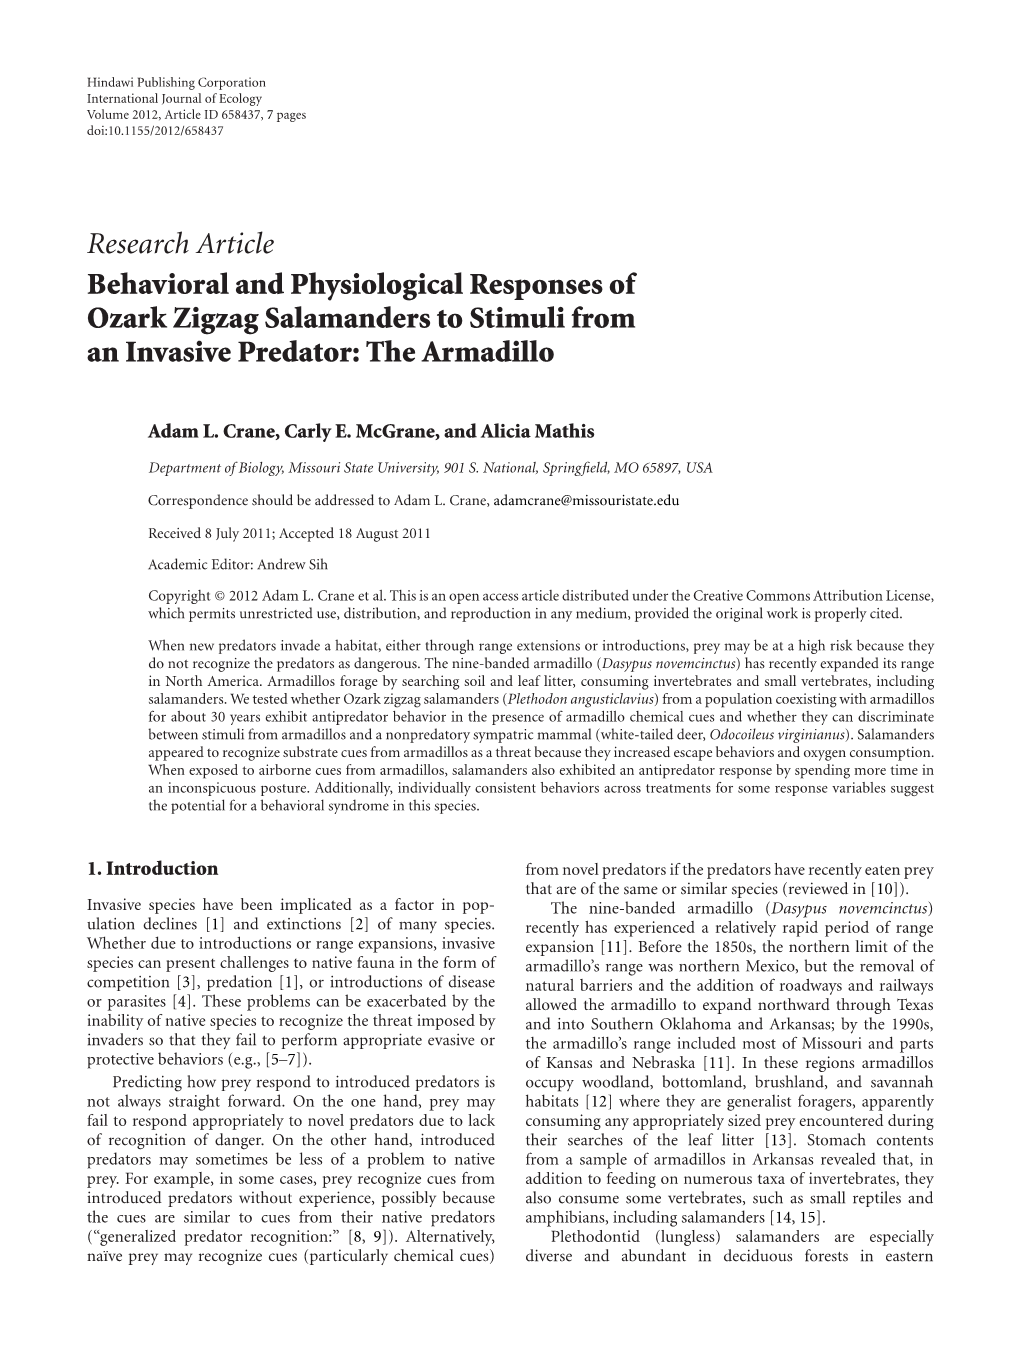 Research Article Behavioral and Physiological Responses of Ozark Zigzag Salamanders to Stimuli from an Invasive Predator: the Armadillo